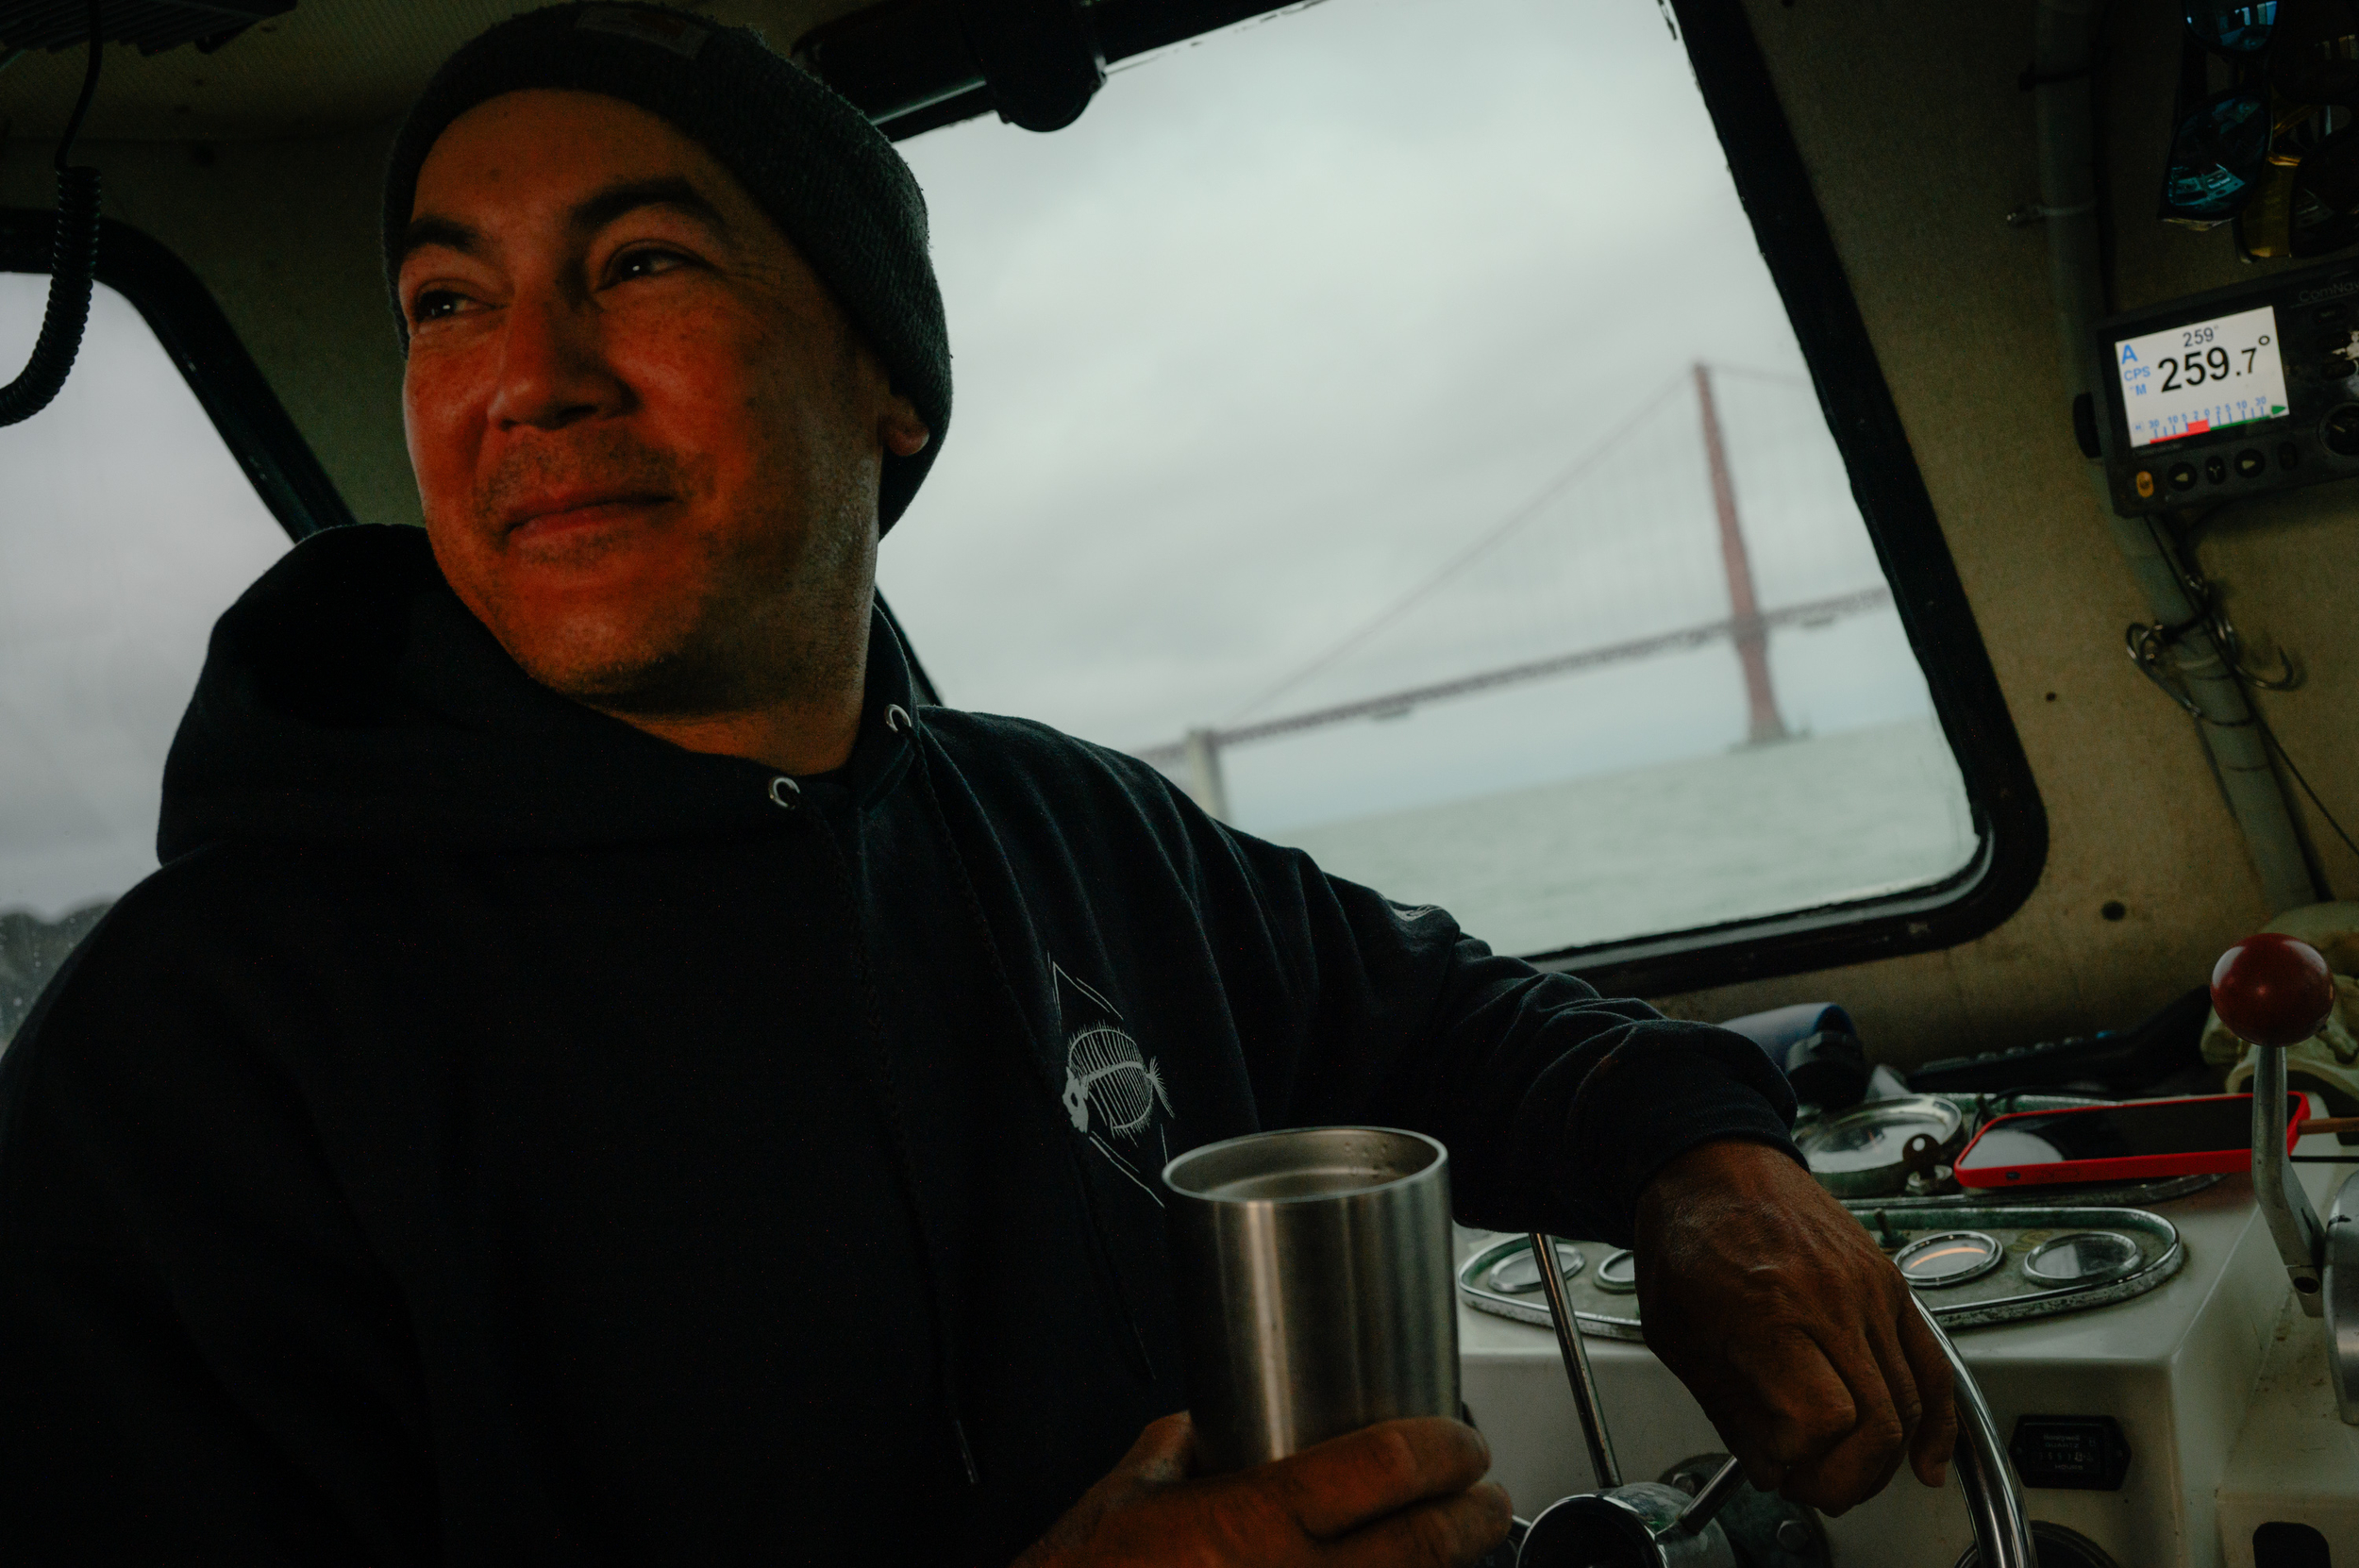 A man smiles holding a cup of coffee and leaning on the steering wheel of a boat. Through the window over his shoulder is the Golden Gate Bridge.